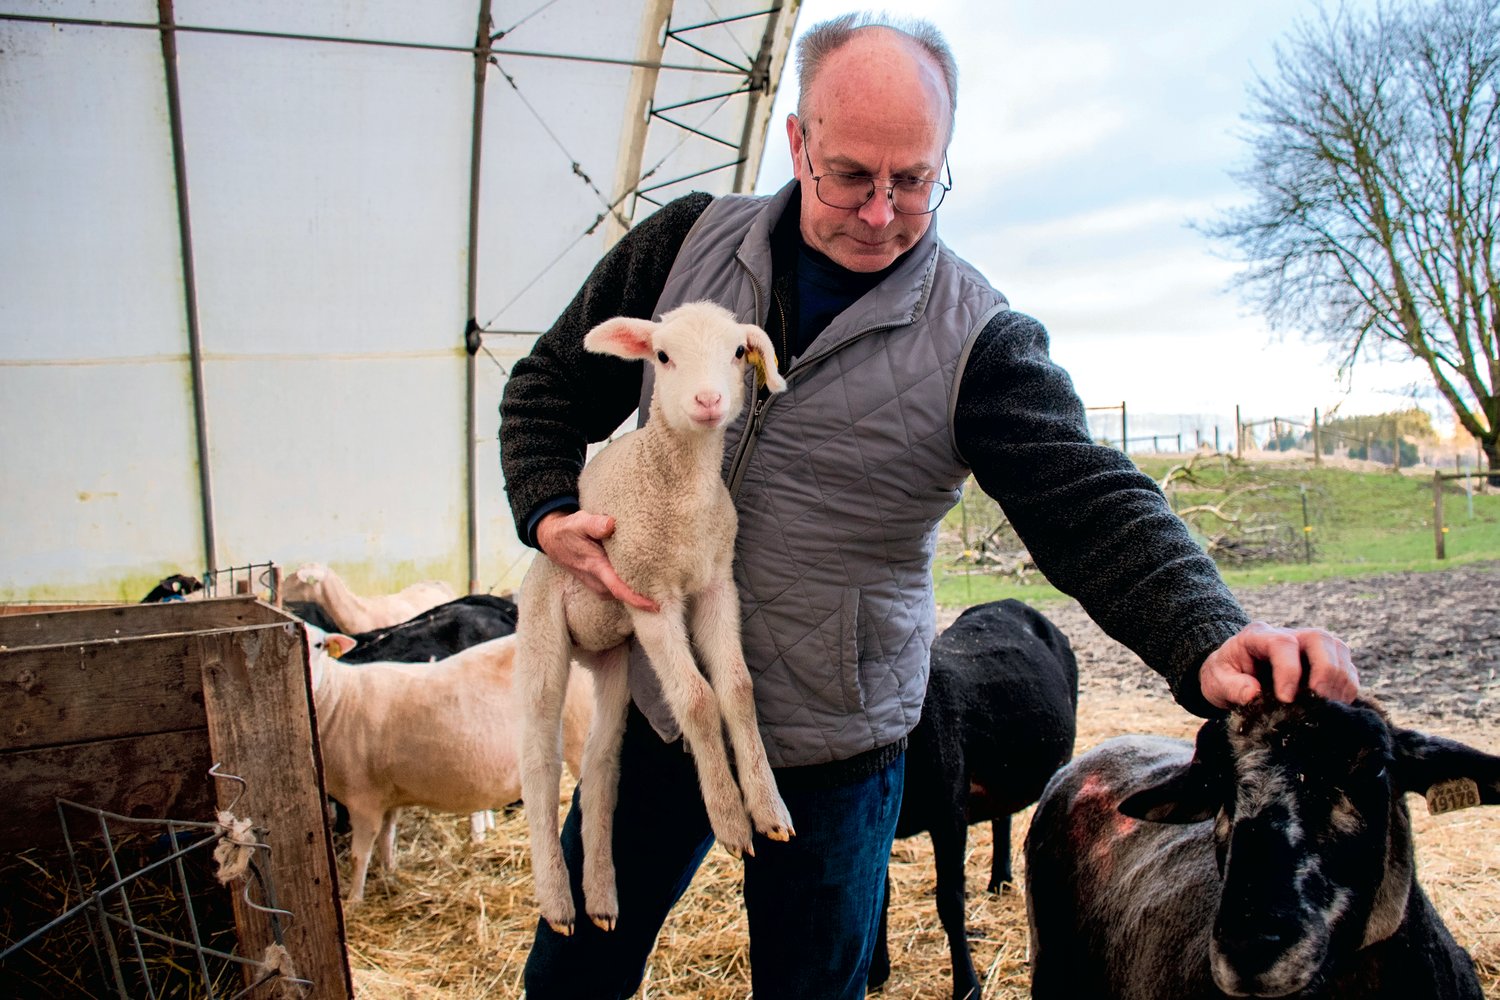 Brad Gregory holds a young lamb in front of a critter pad while petting another member of his flock of East Friesian sheep at Black Sheep Creamery in Adna.